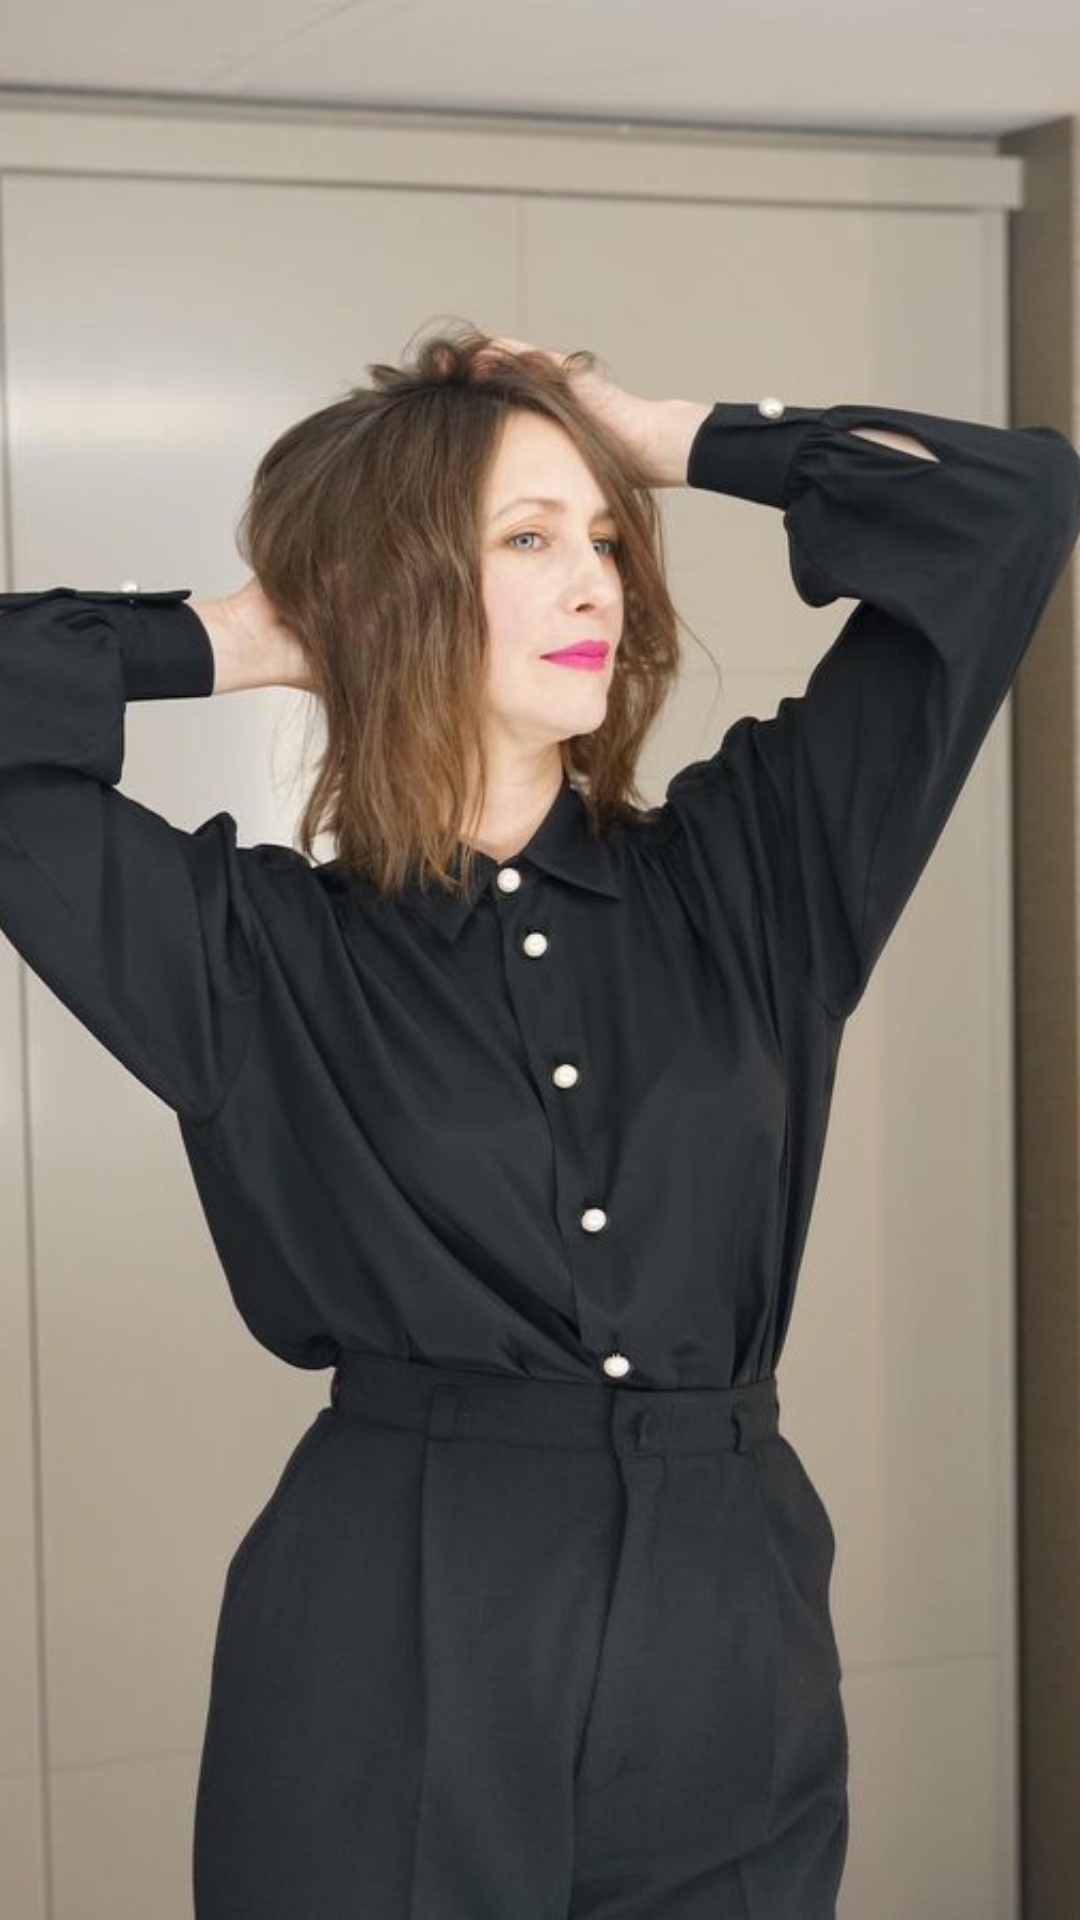 Vera Farmiga birthday special: Fun and interesting facts about The Conjuring actor